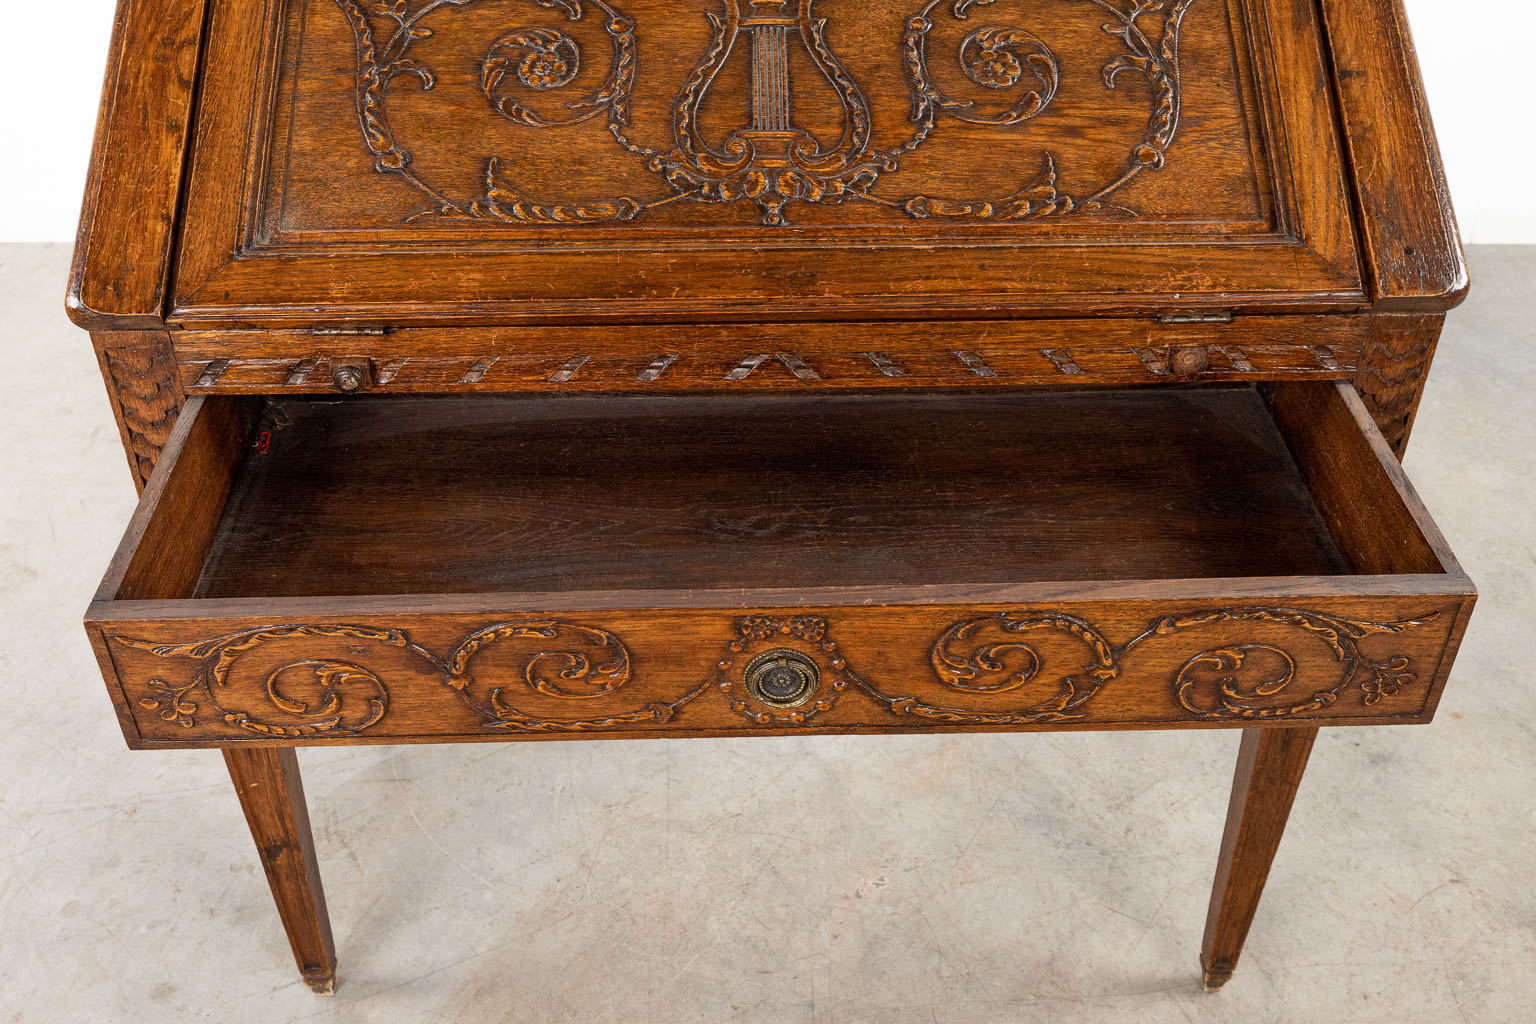 A secretaire made of sculptured wood in Louis XVI style, of oak. (H:92cm)